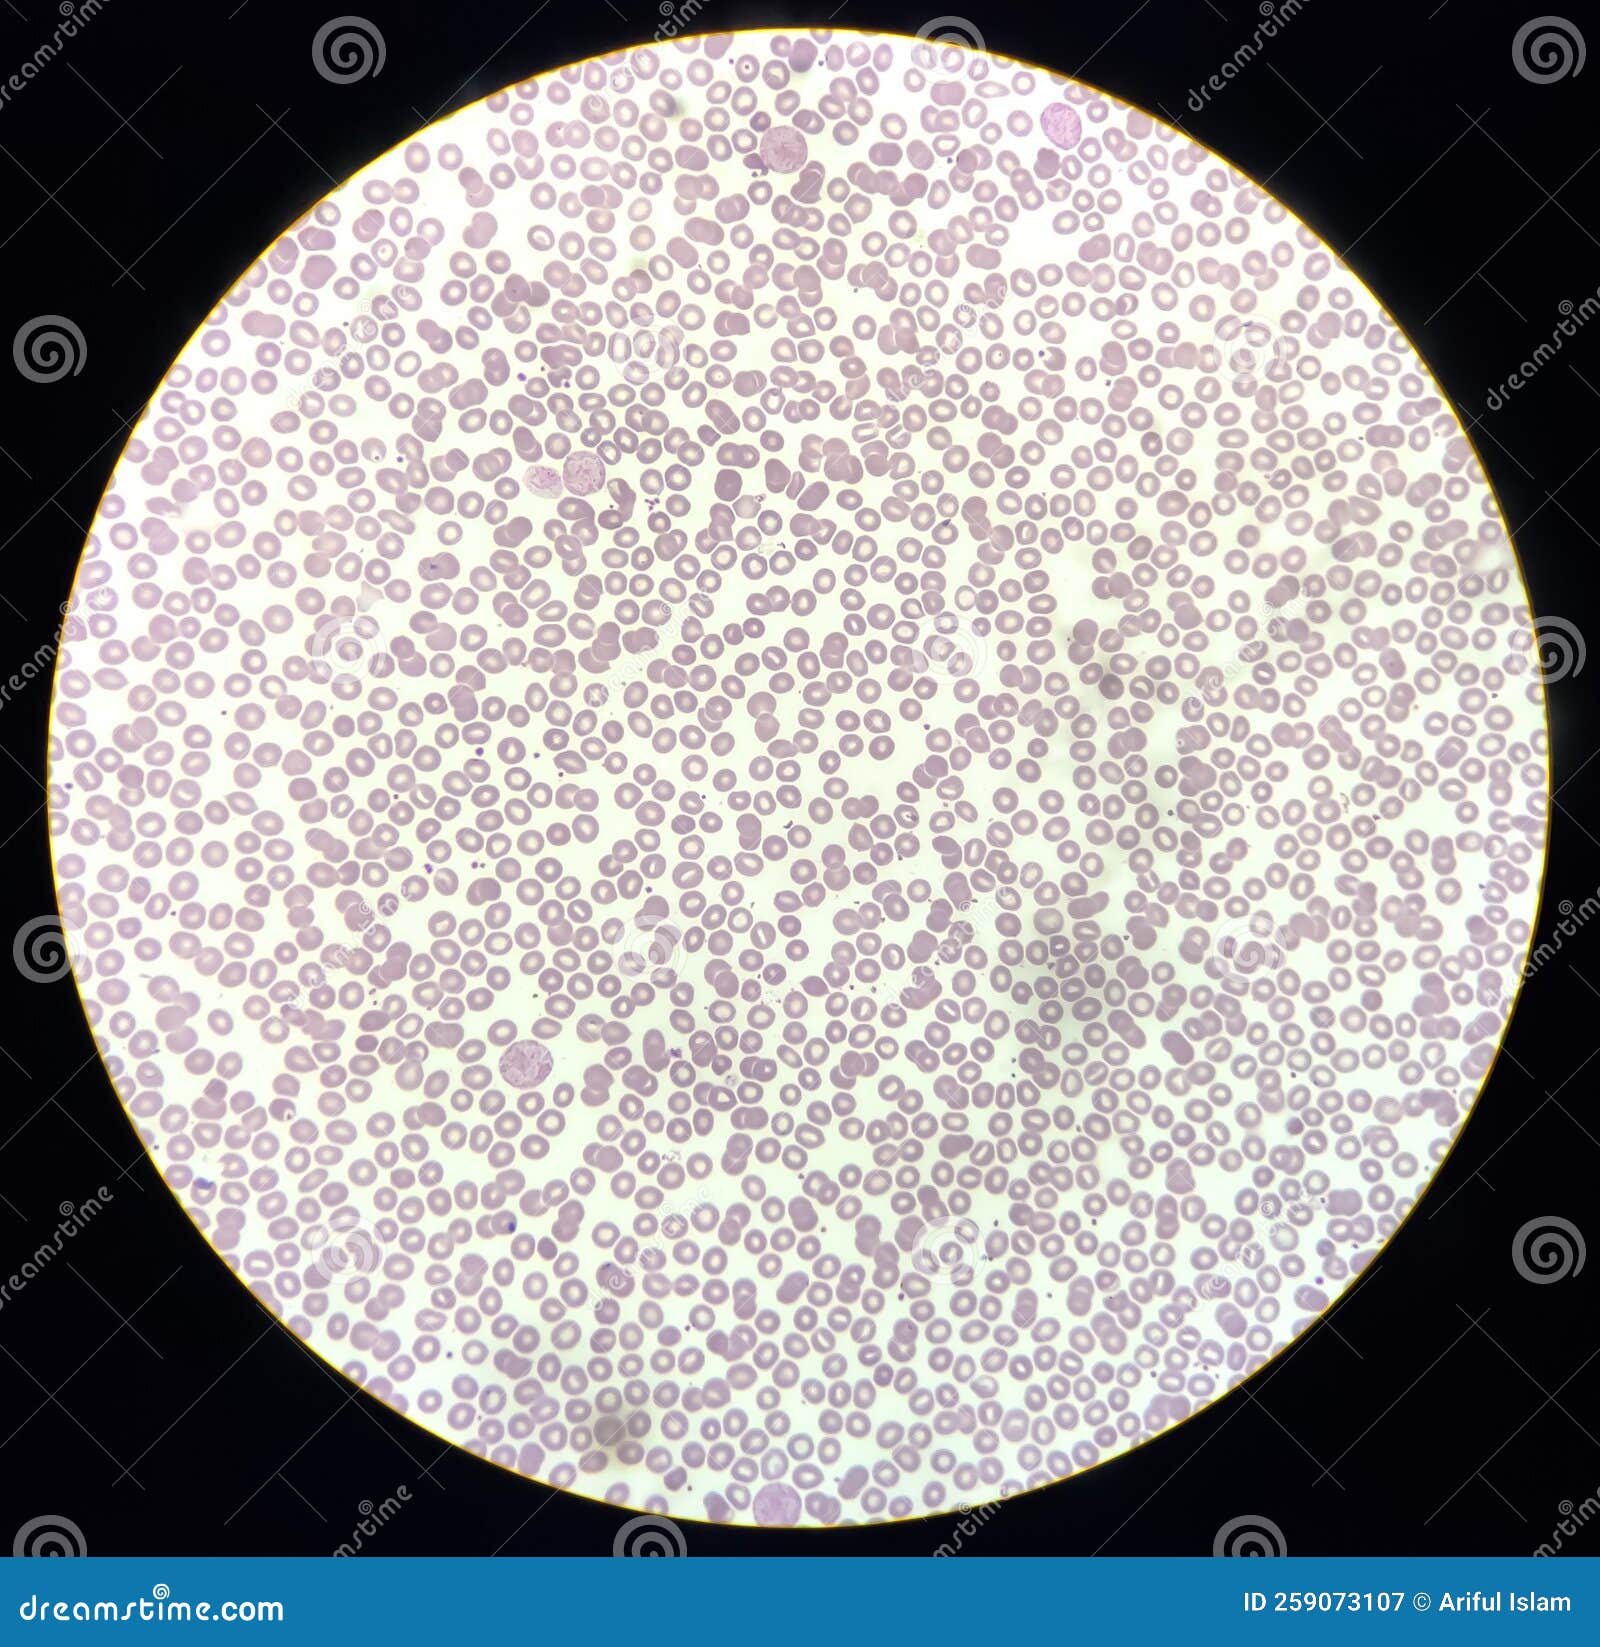 blood film showing a decrease of platelets and white blood cells. immune thrombocytopenic purpura (itp)